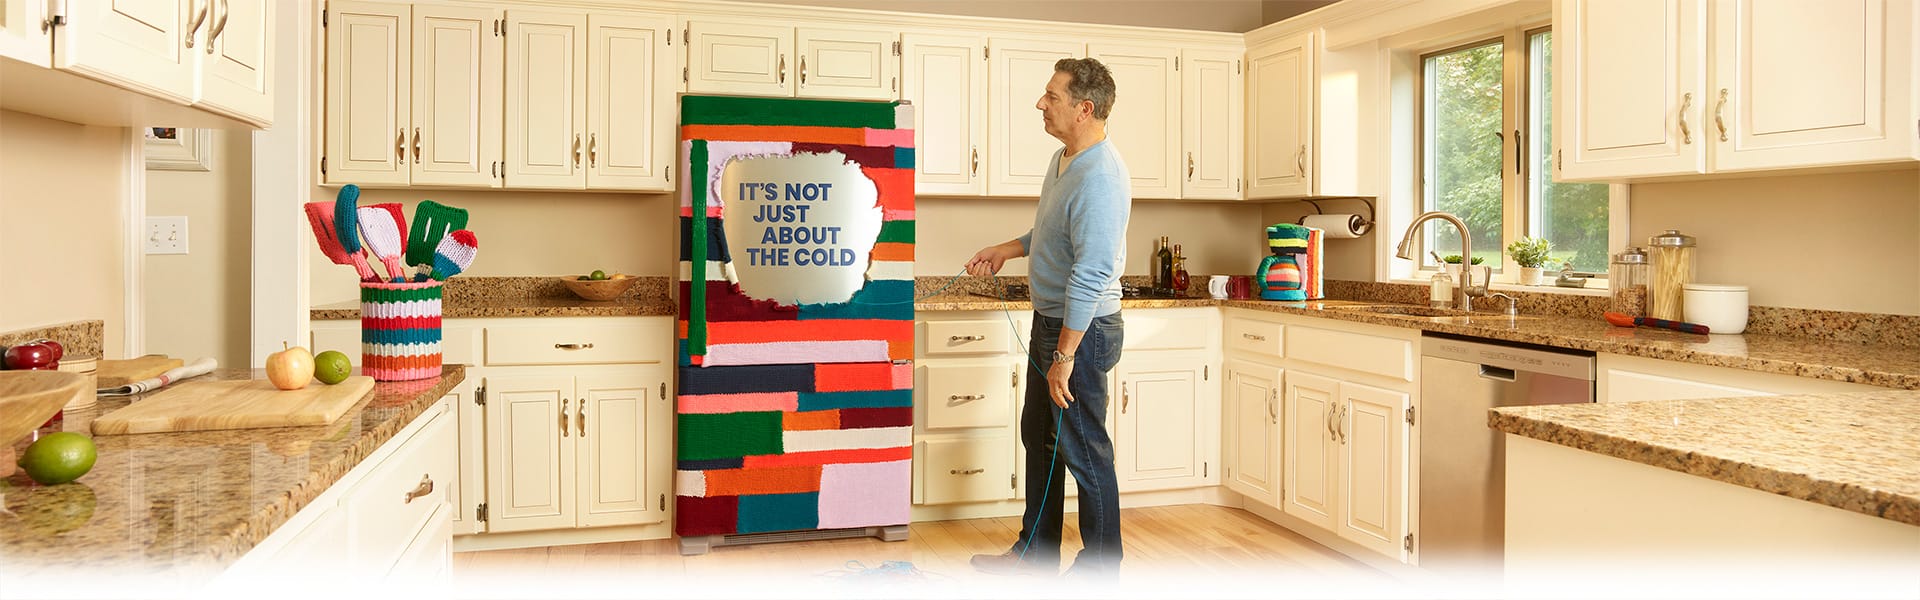 Refrigerator wrapped in yarn that says It's not just about the cold